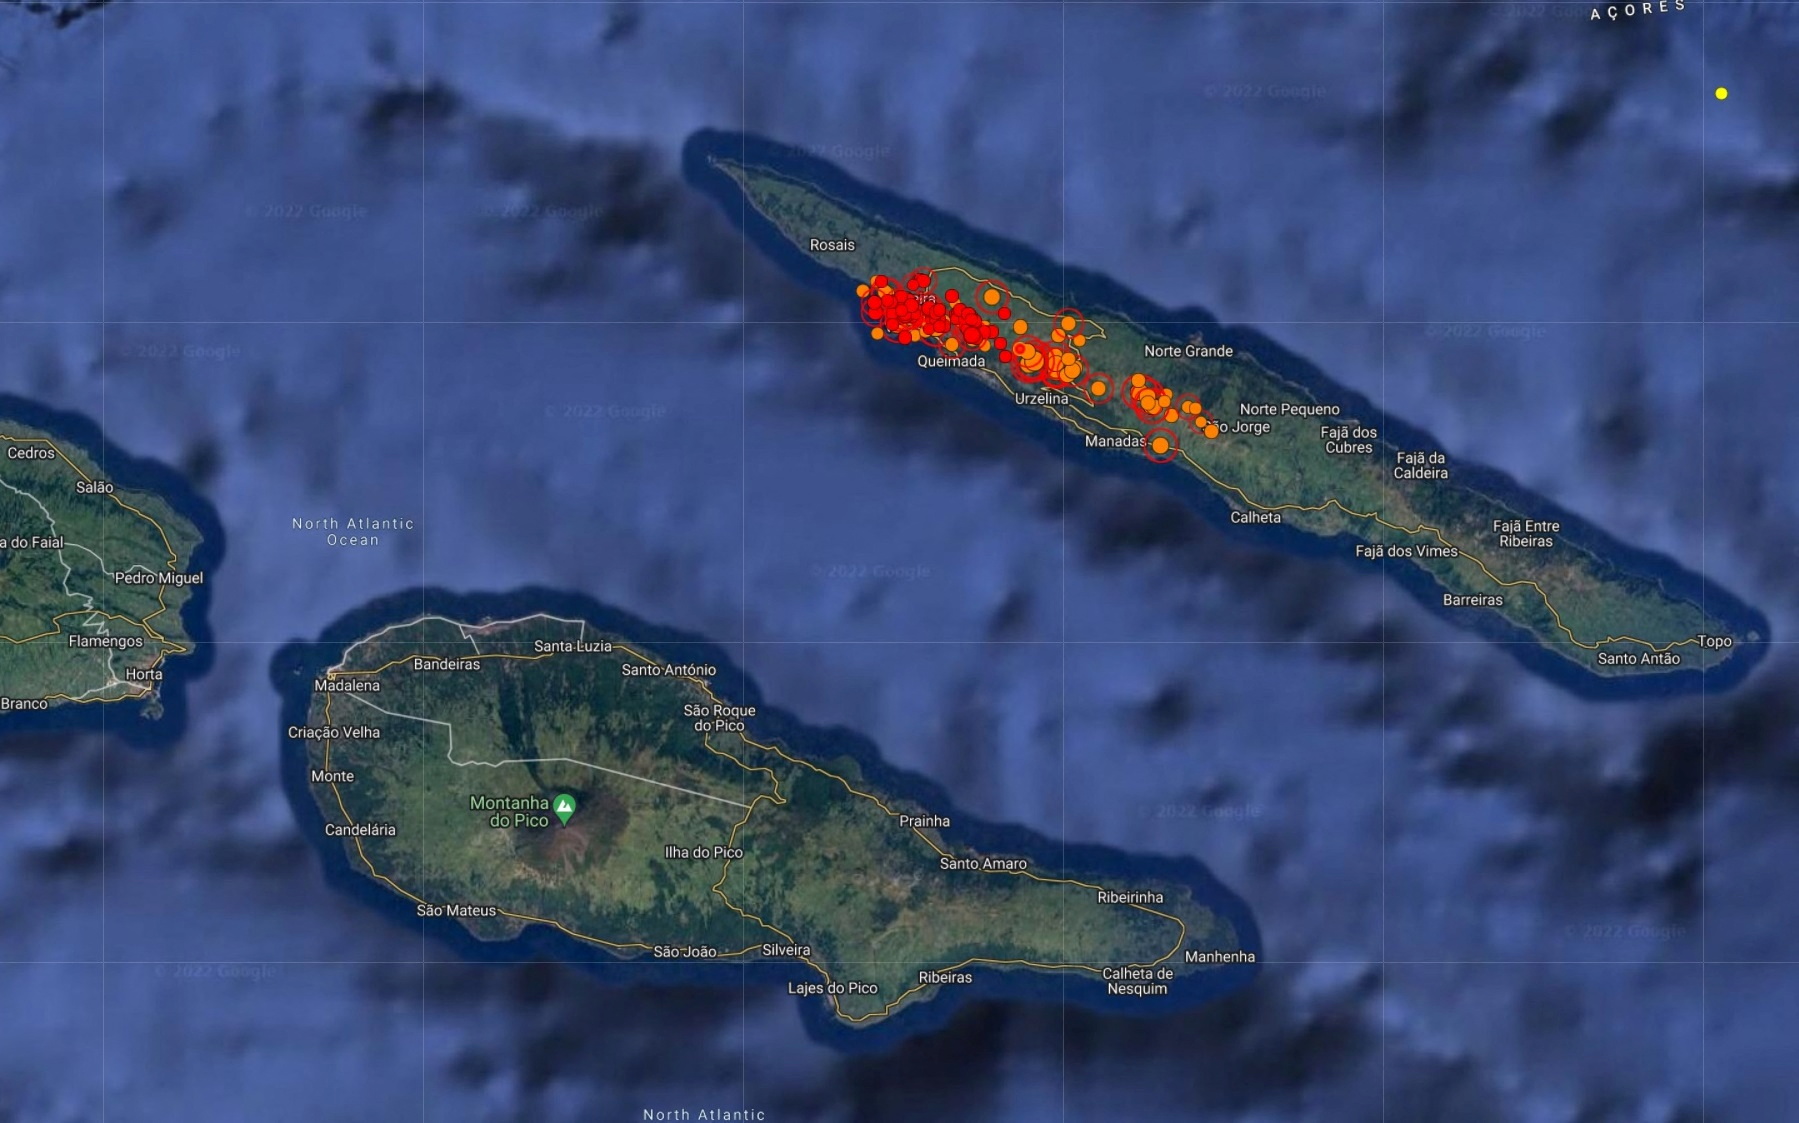 Series of Earthquales On Azores Island Could Lead to Volcanic Eruption